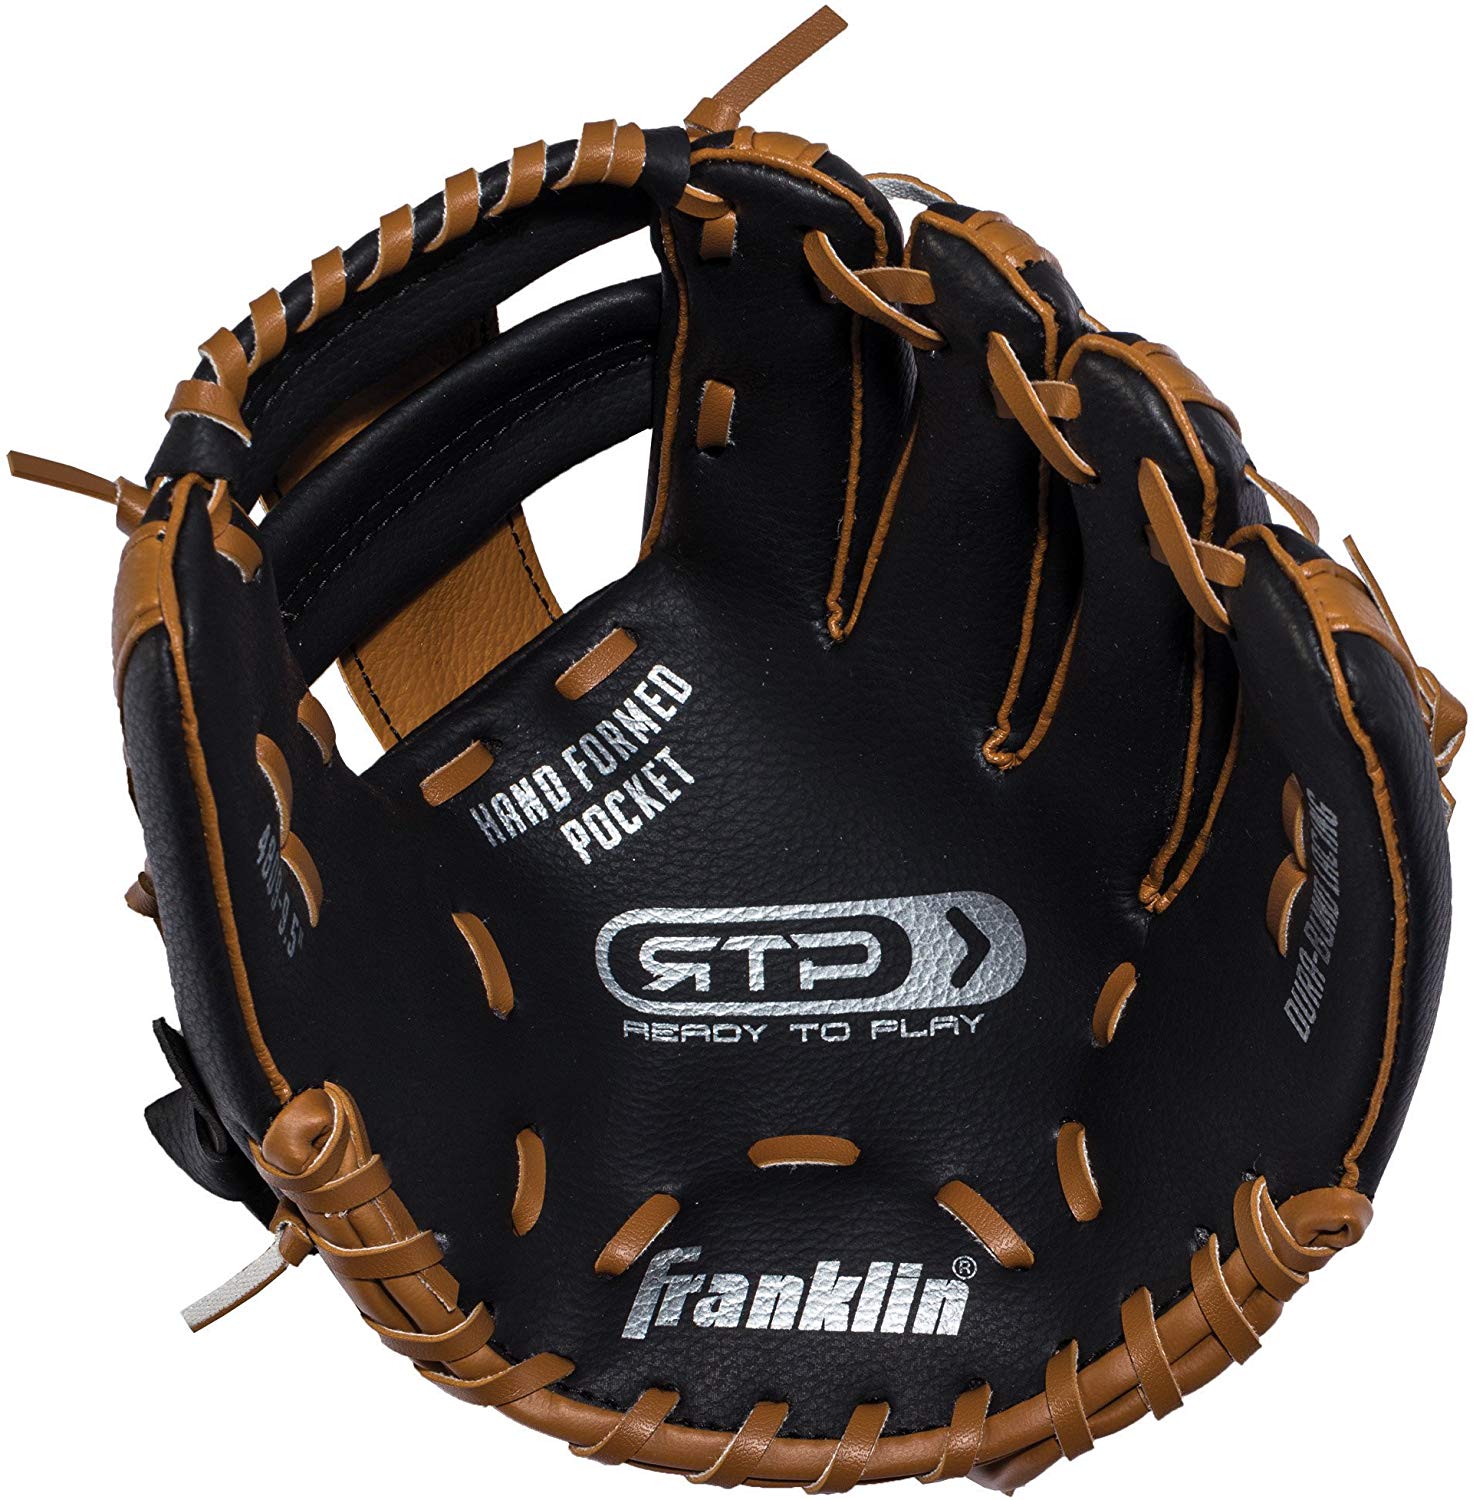 Franklin Sports 9.5 In. RTP Series Baseball Glove, Right Hand Throw, with Ball - image 2 of 4